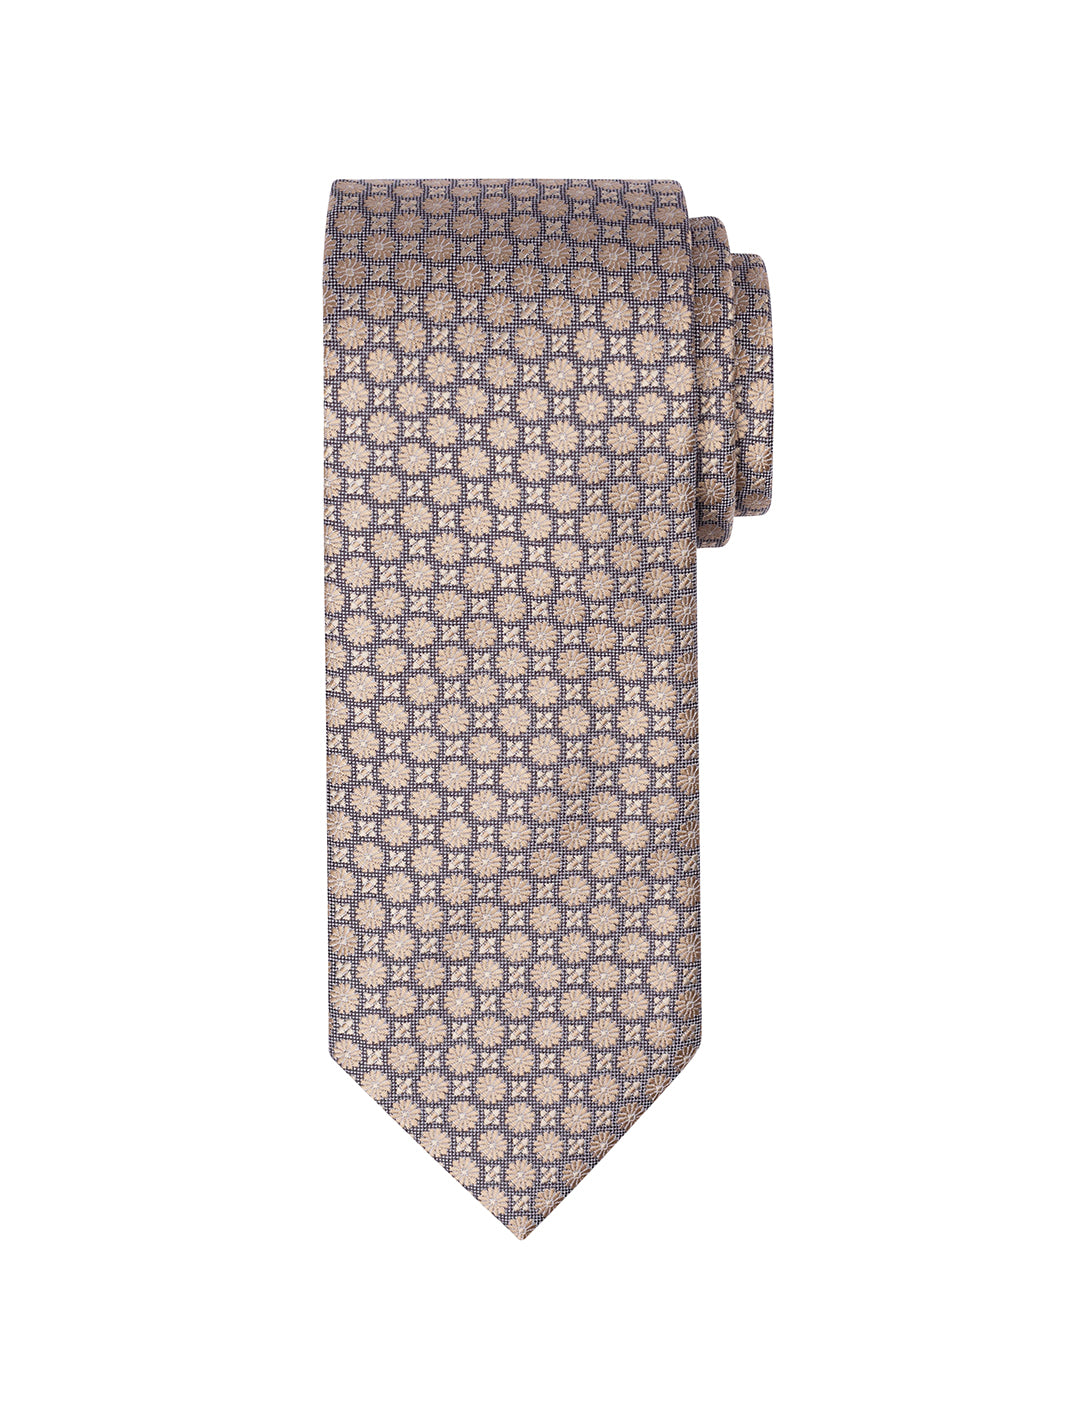 Men's T.O. Collection Medallion Tie - Gold